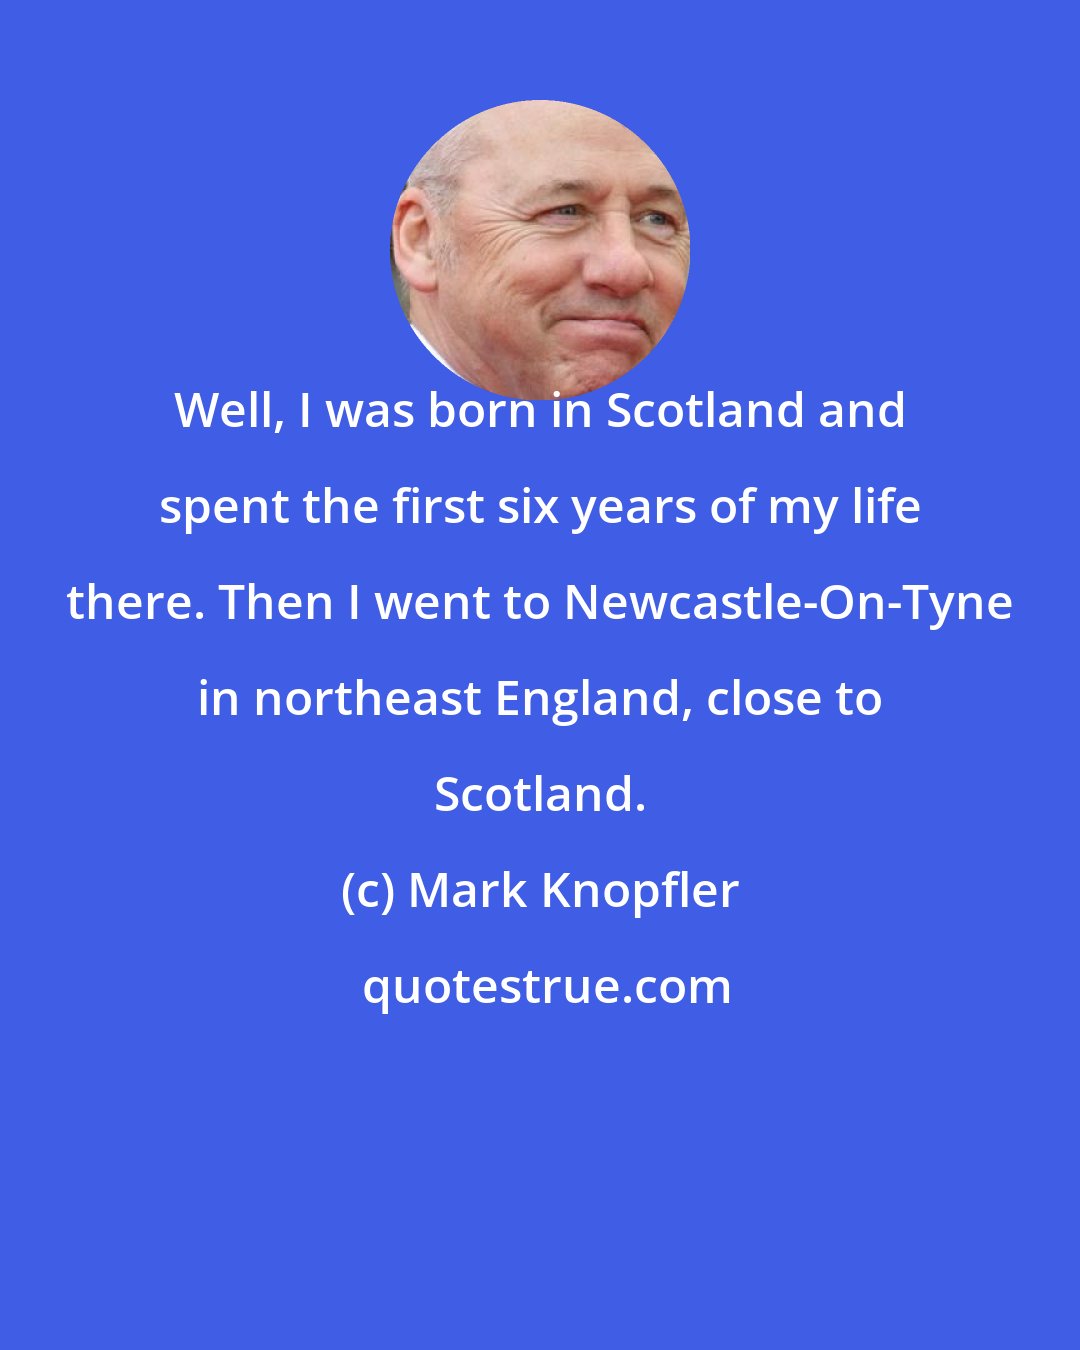 Mark Knopfler: Well, I was born in Scotland and spent the first six years of my life there. Then I went to Newcastle-On-Tyne in northeast England, close to Scotland.